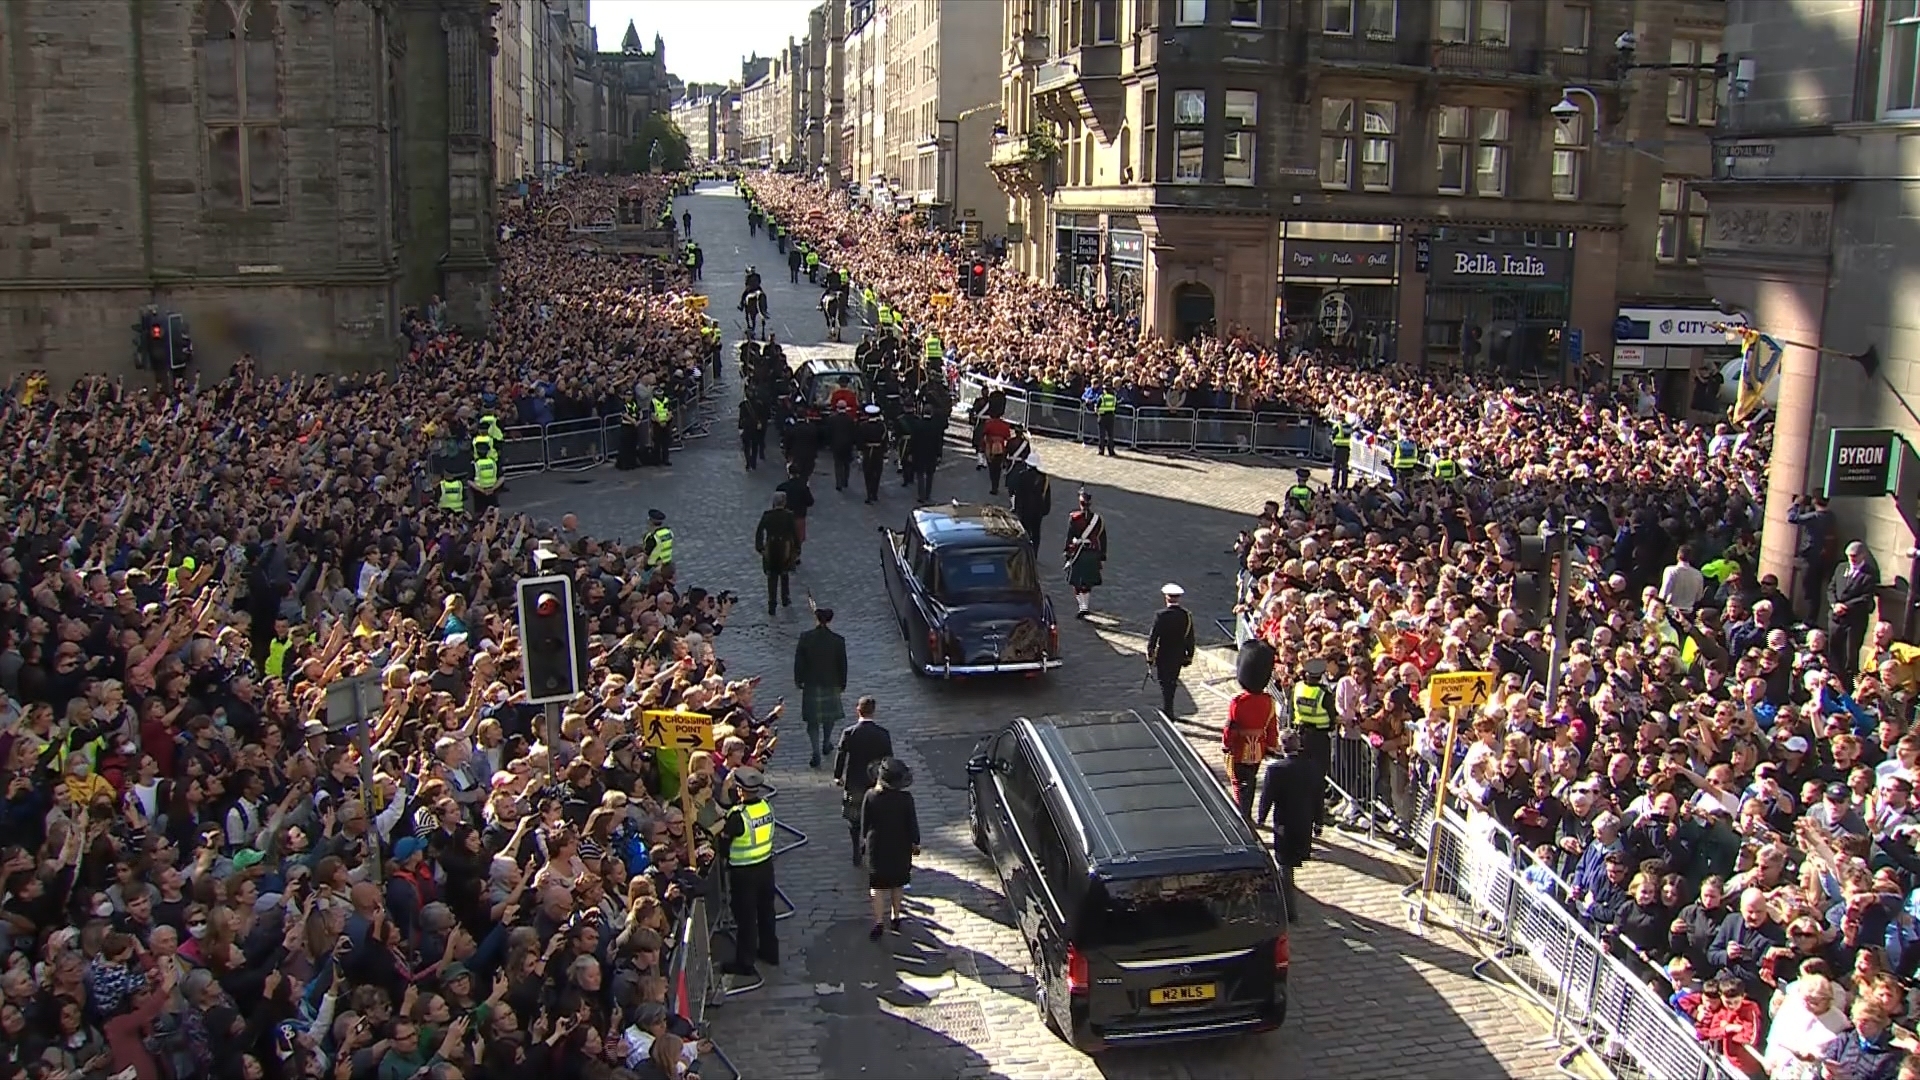 King Charles led the Queen's coffin in a procession up the Royal Mile.